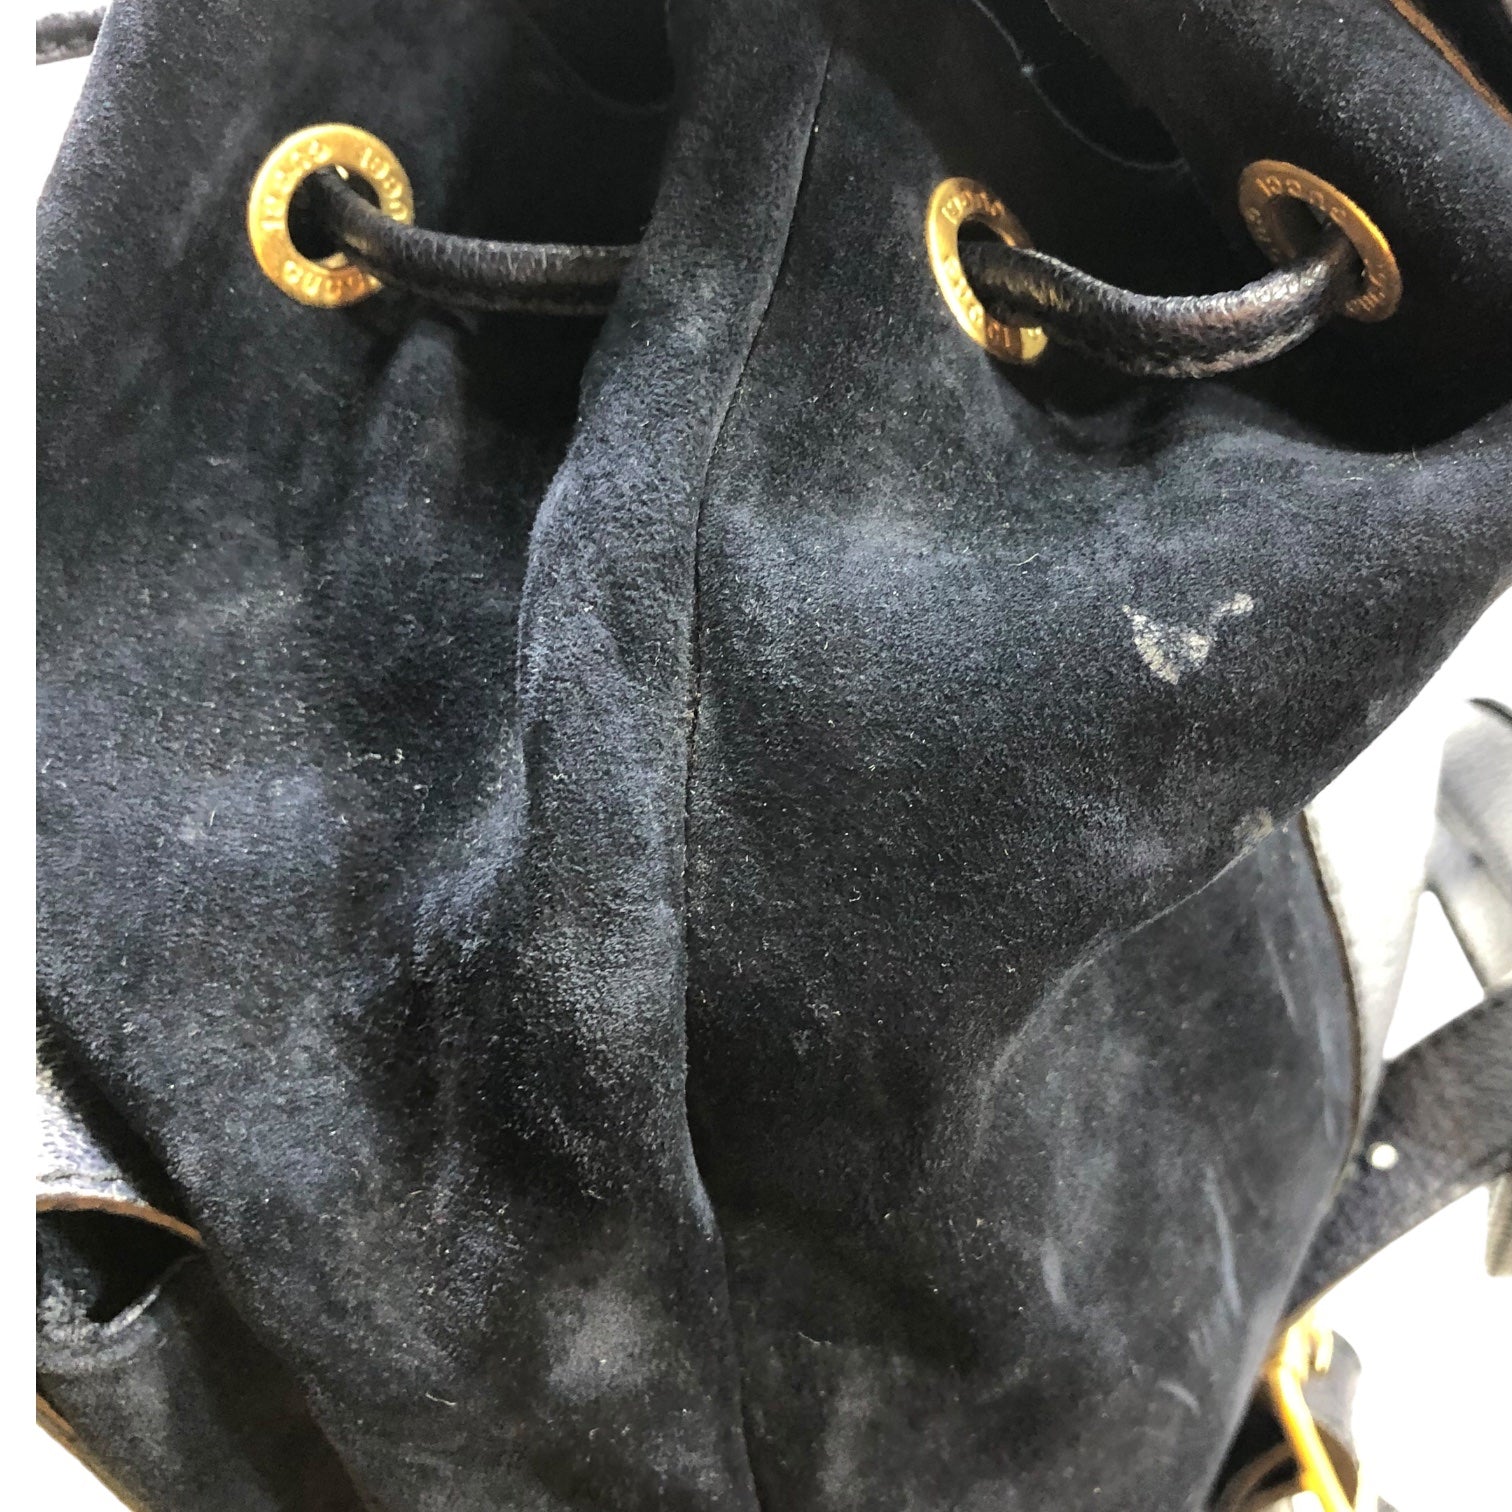 GUCCI(グッチ) vintage suede leather bamboo backpack ヴィンテージ スウェード レザー バンブー リュック 003 1998 0016 ネイビー バックパック 竹 鞄 バッグ